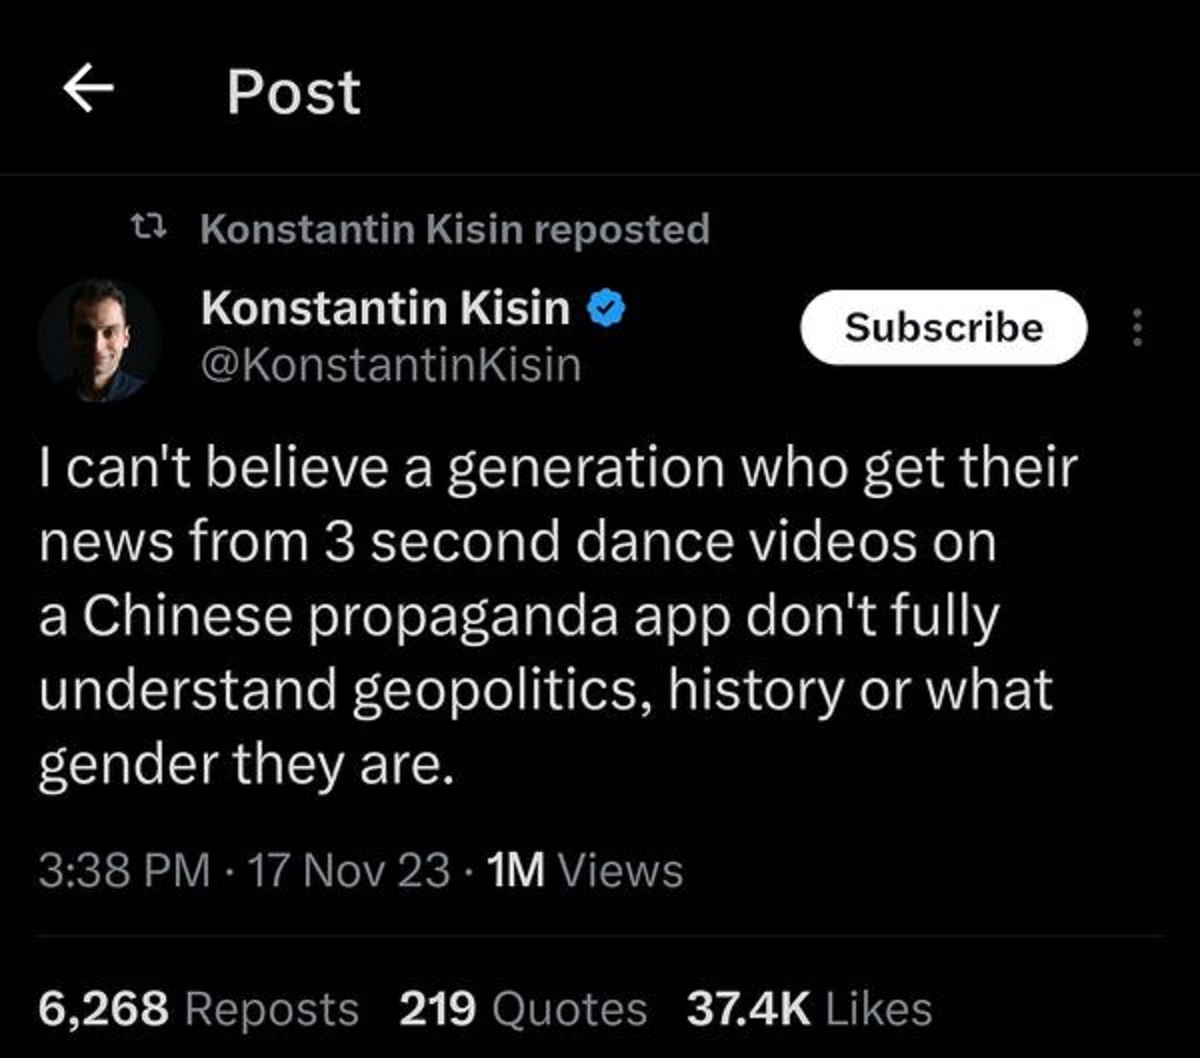 screenshot - 7 Post t Konstantin Kisin reposted Konstantin Kisin Kisin Subscribe I can't believe a generation who get their news from 3 second dance videos on a Chinese propaganda app don't fully understand geopolitics, history or what gender they are. 17